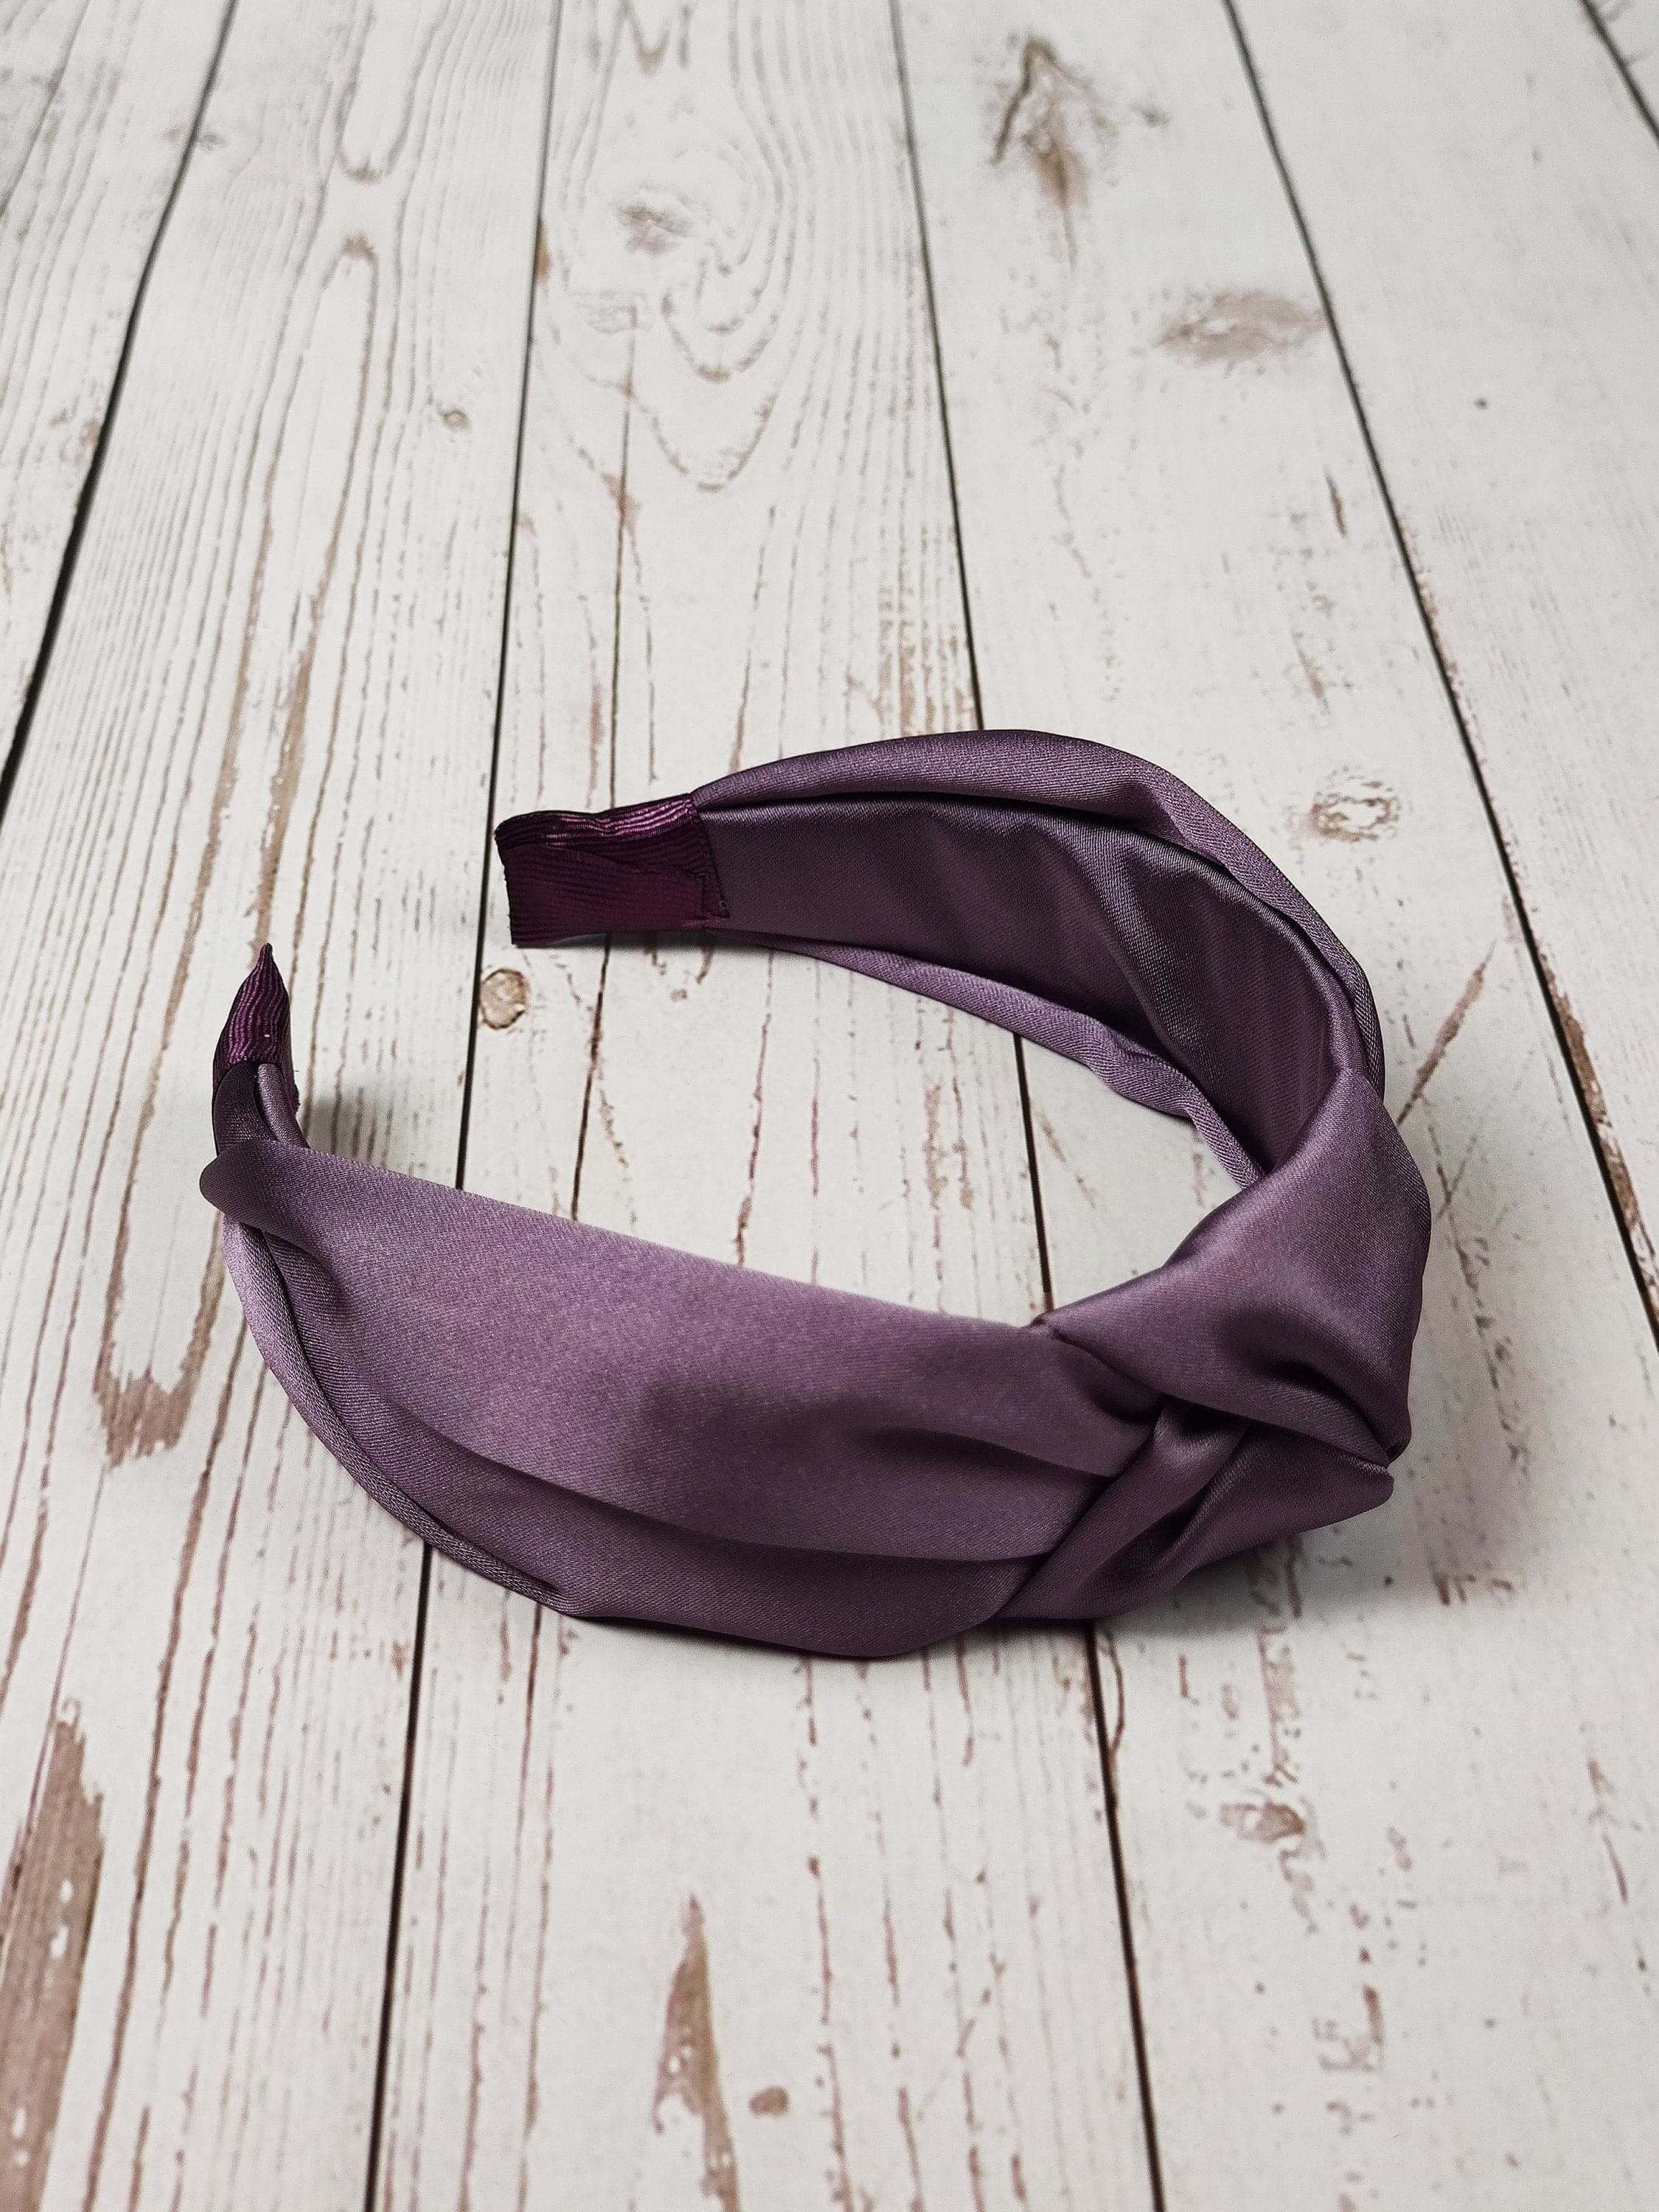 Bring the sunshine into your life with this pretty lilac satin headband. It will brighten up any day and add some much-needed color to your look.